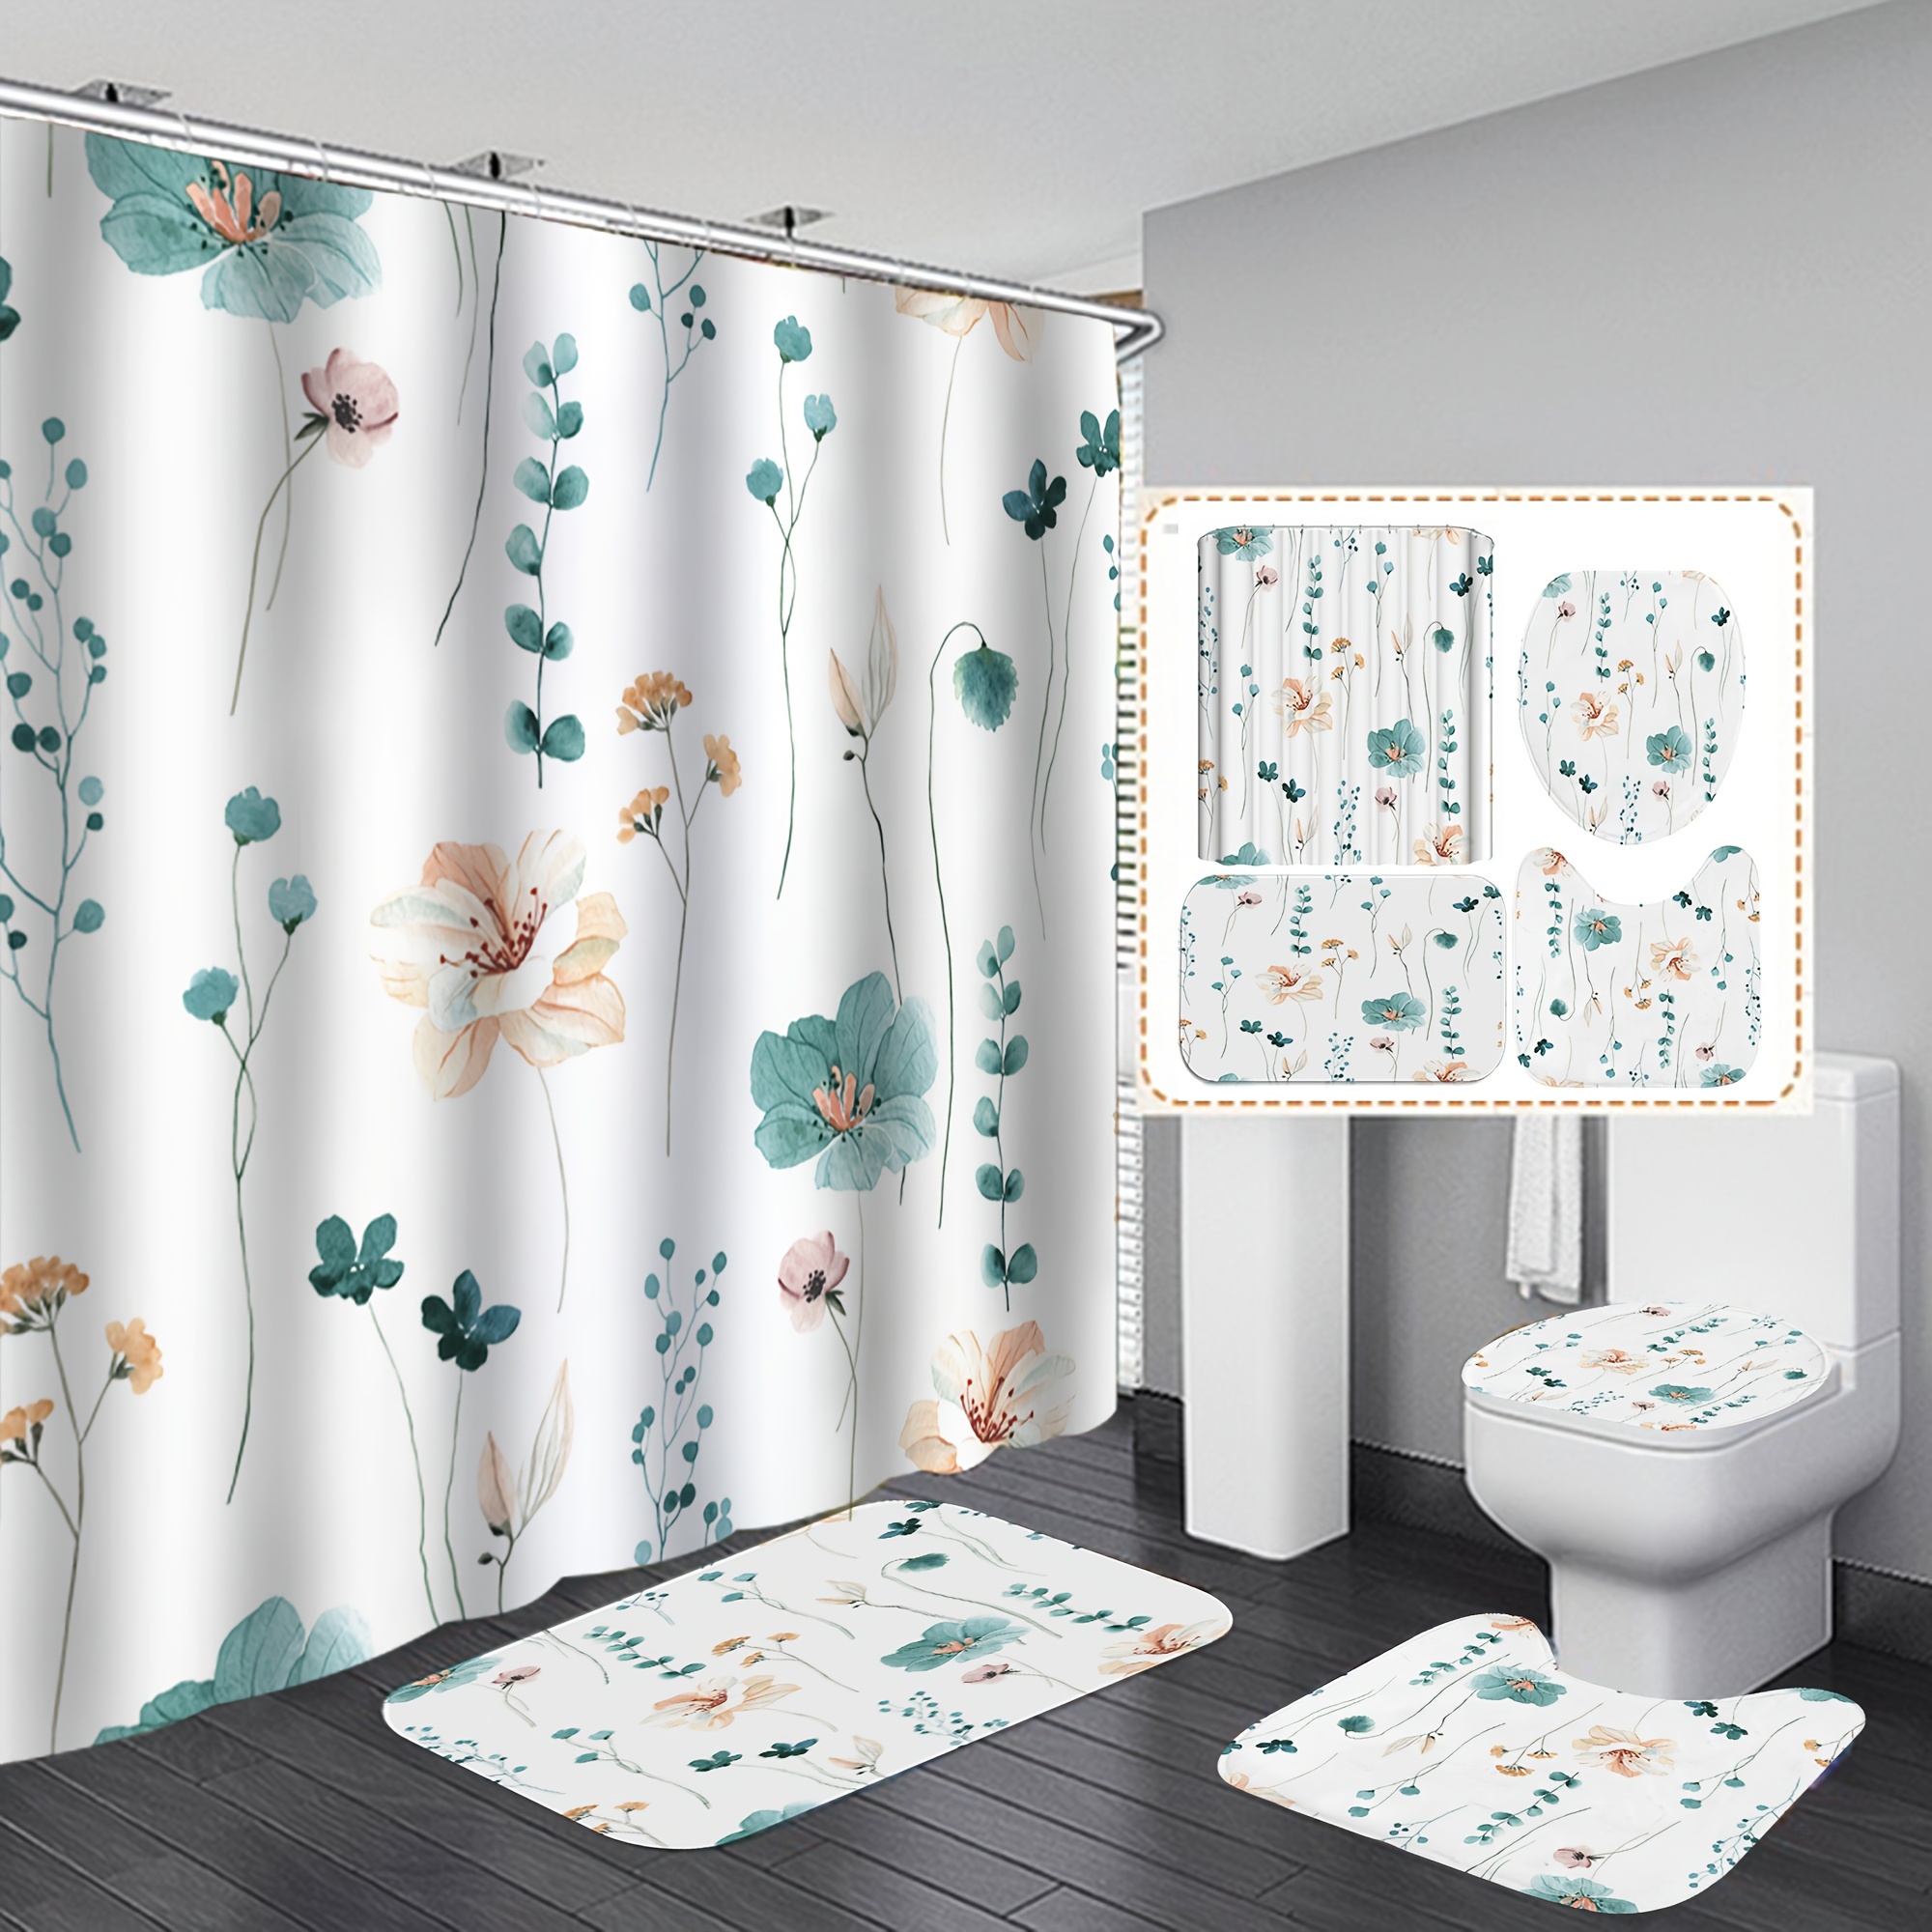 Floral Shower Curtain, Bathroom Decoration Shower Curtain Sets 72x72 inch with Hooks, Red